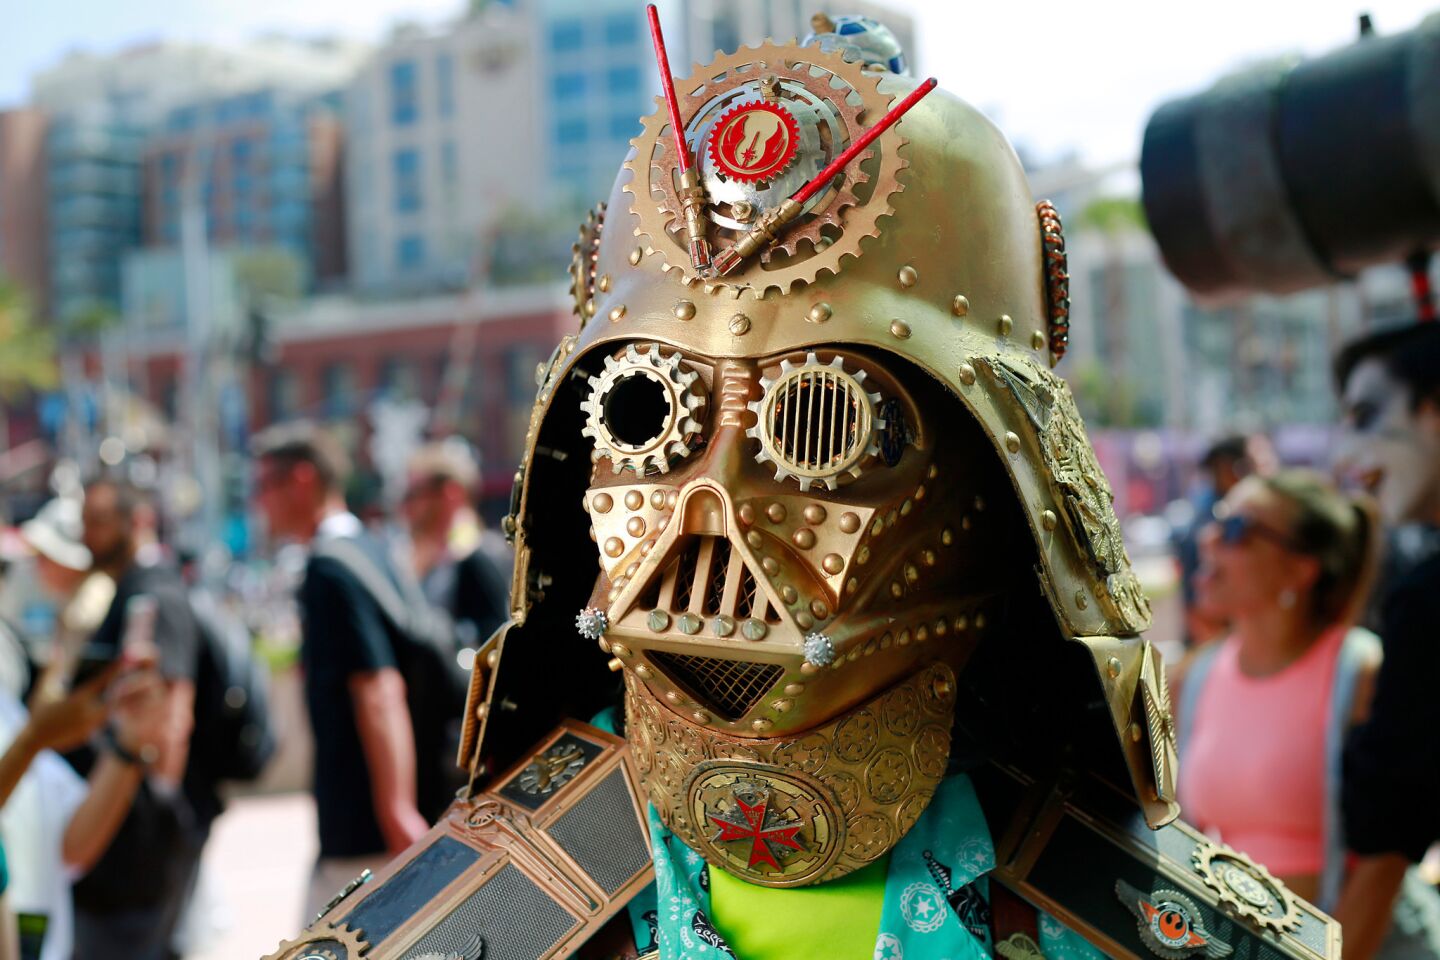 Chris Canole of San Diego dressed as Dude Vader at Comic-Con in San Diego on July 20.